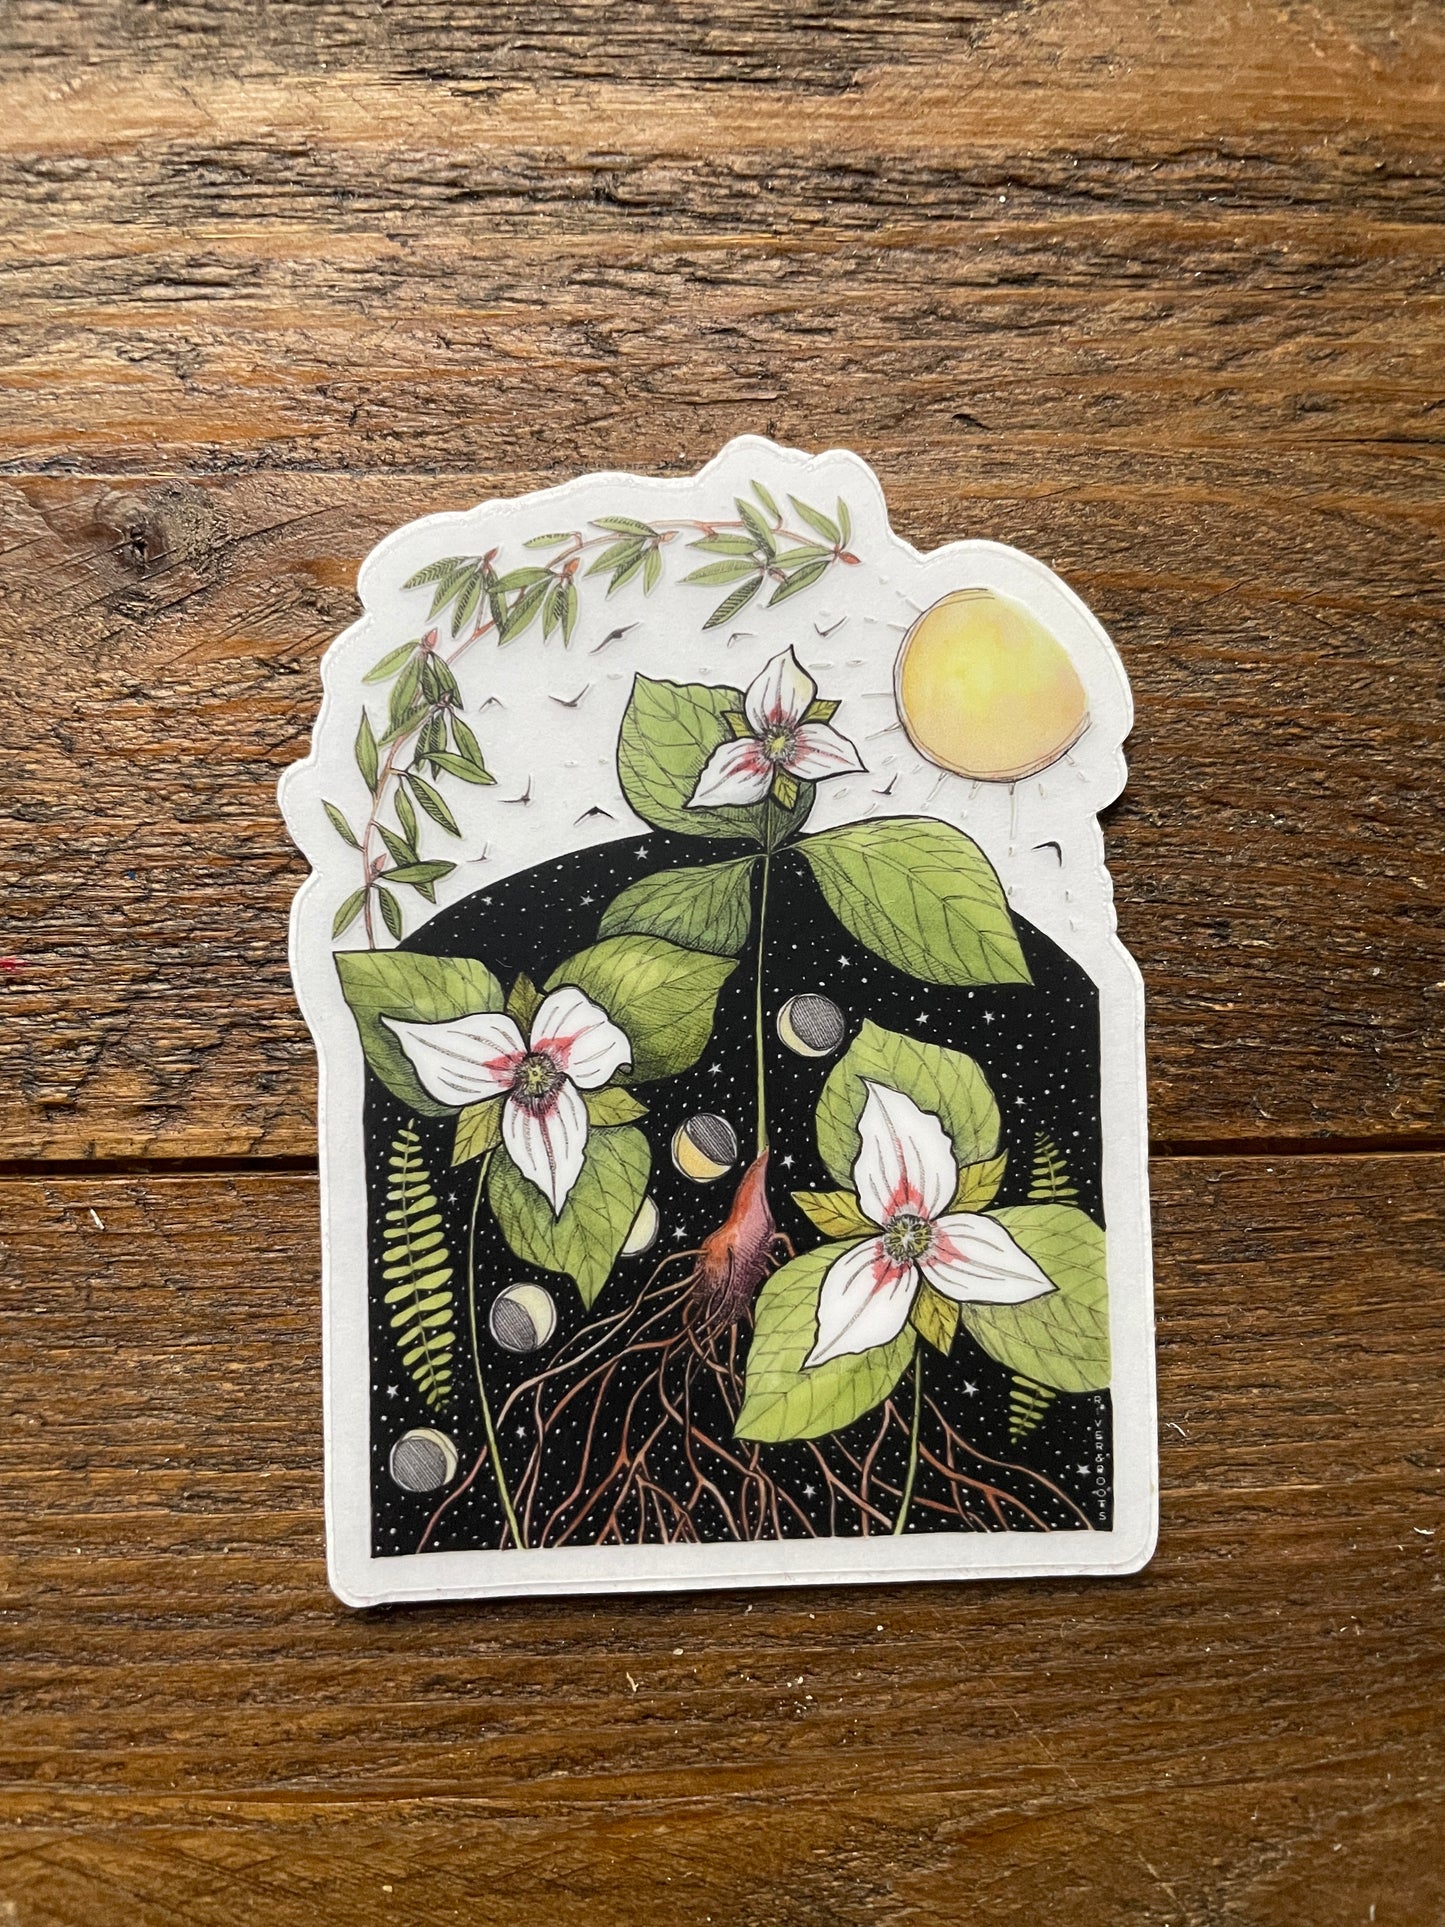 Painted Trillium 3" Vinyl Sticker Phases and Forests